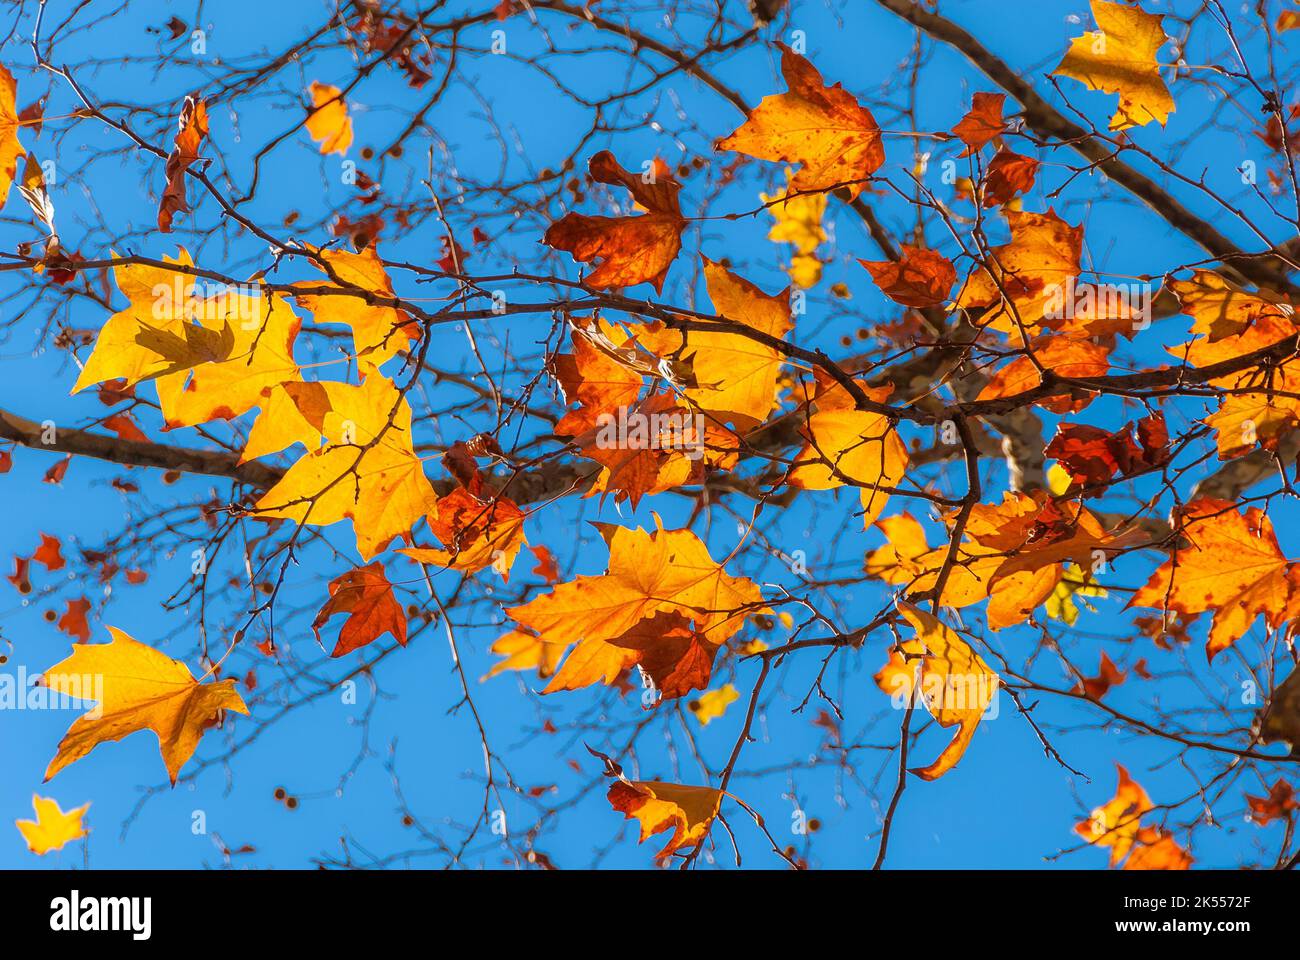 Autumnal and foliage background. Backlit sycamore brown, orange, yellow and red leaves with blue sky Stock Photo